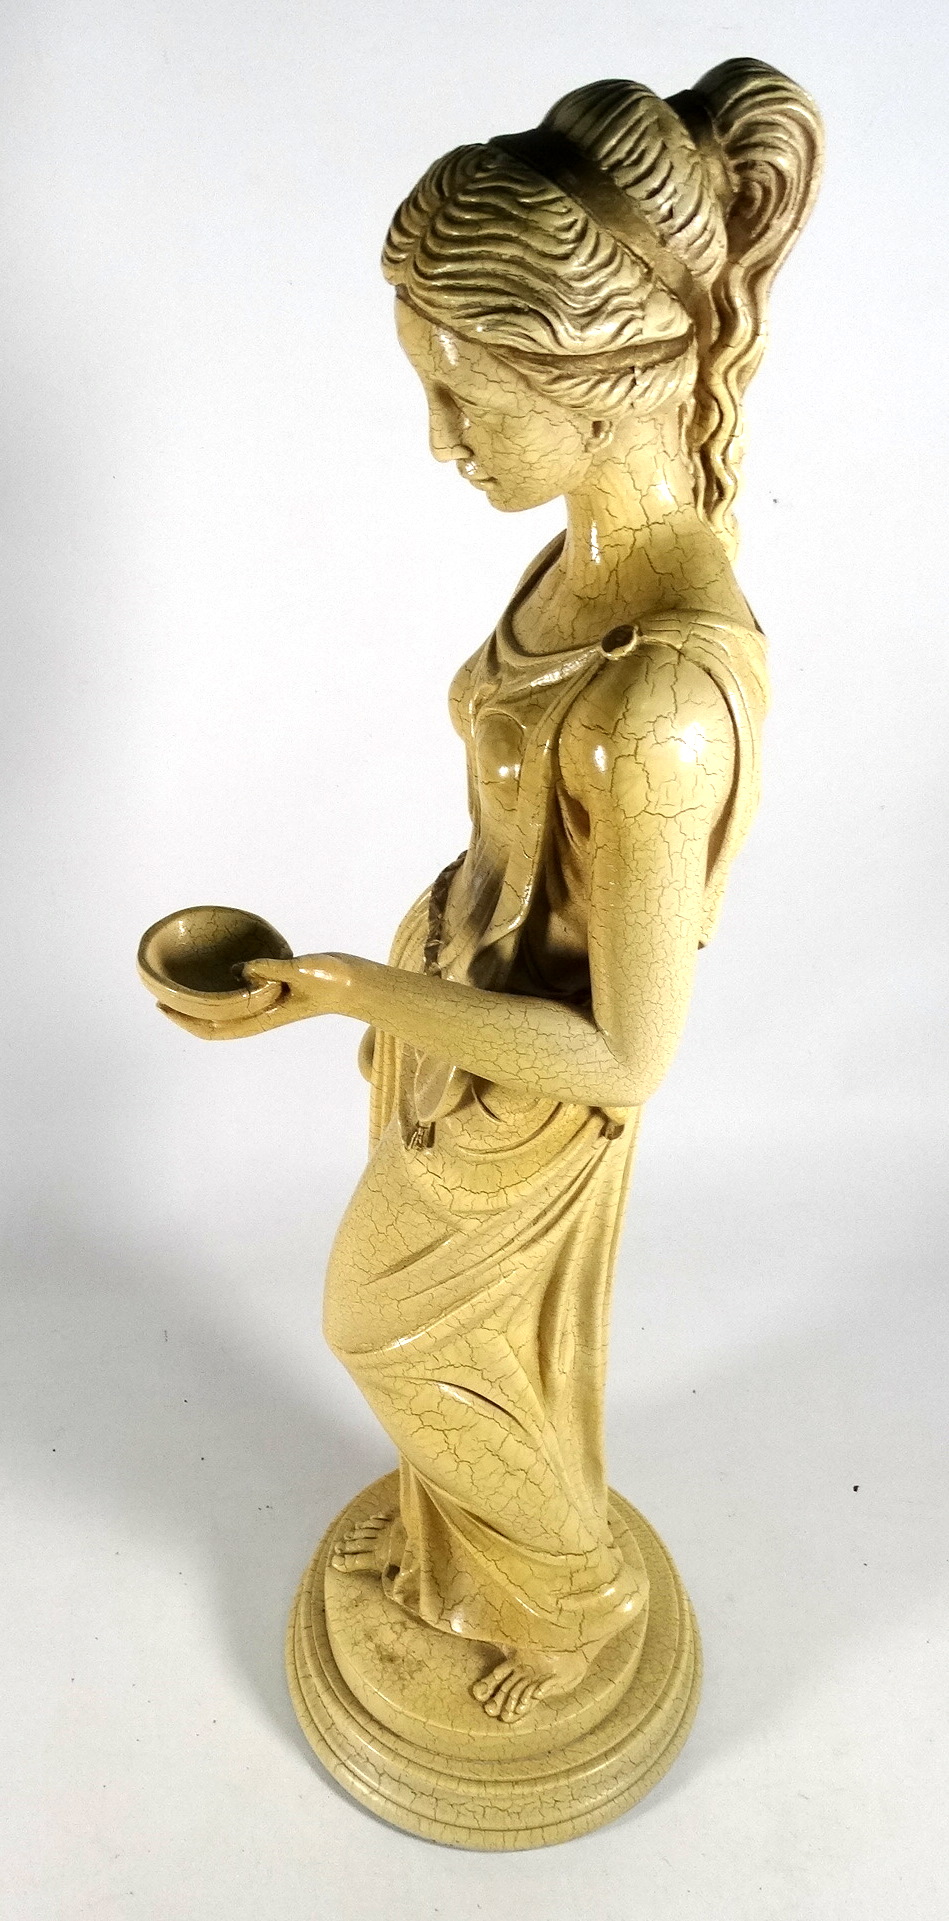 A statue of a classical female figure - ceramic with a craquelure finish, height 63cm. - Image 2 of 2